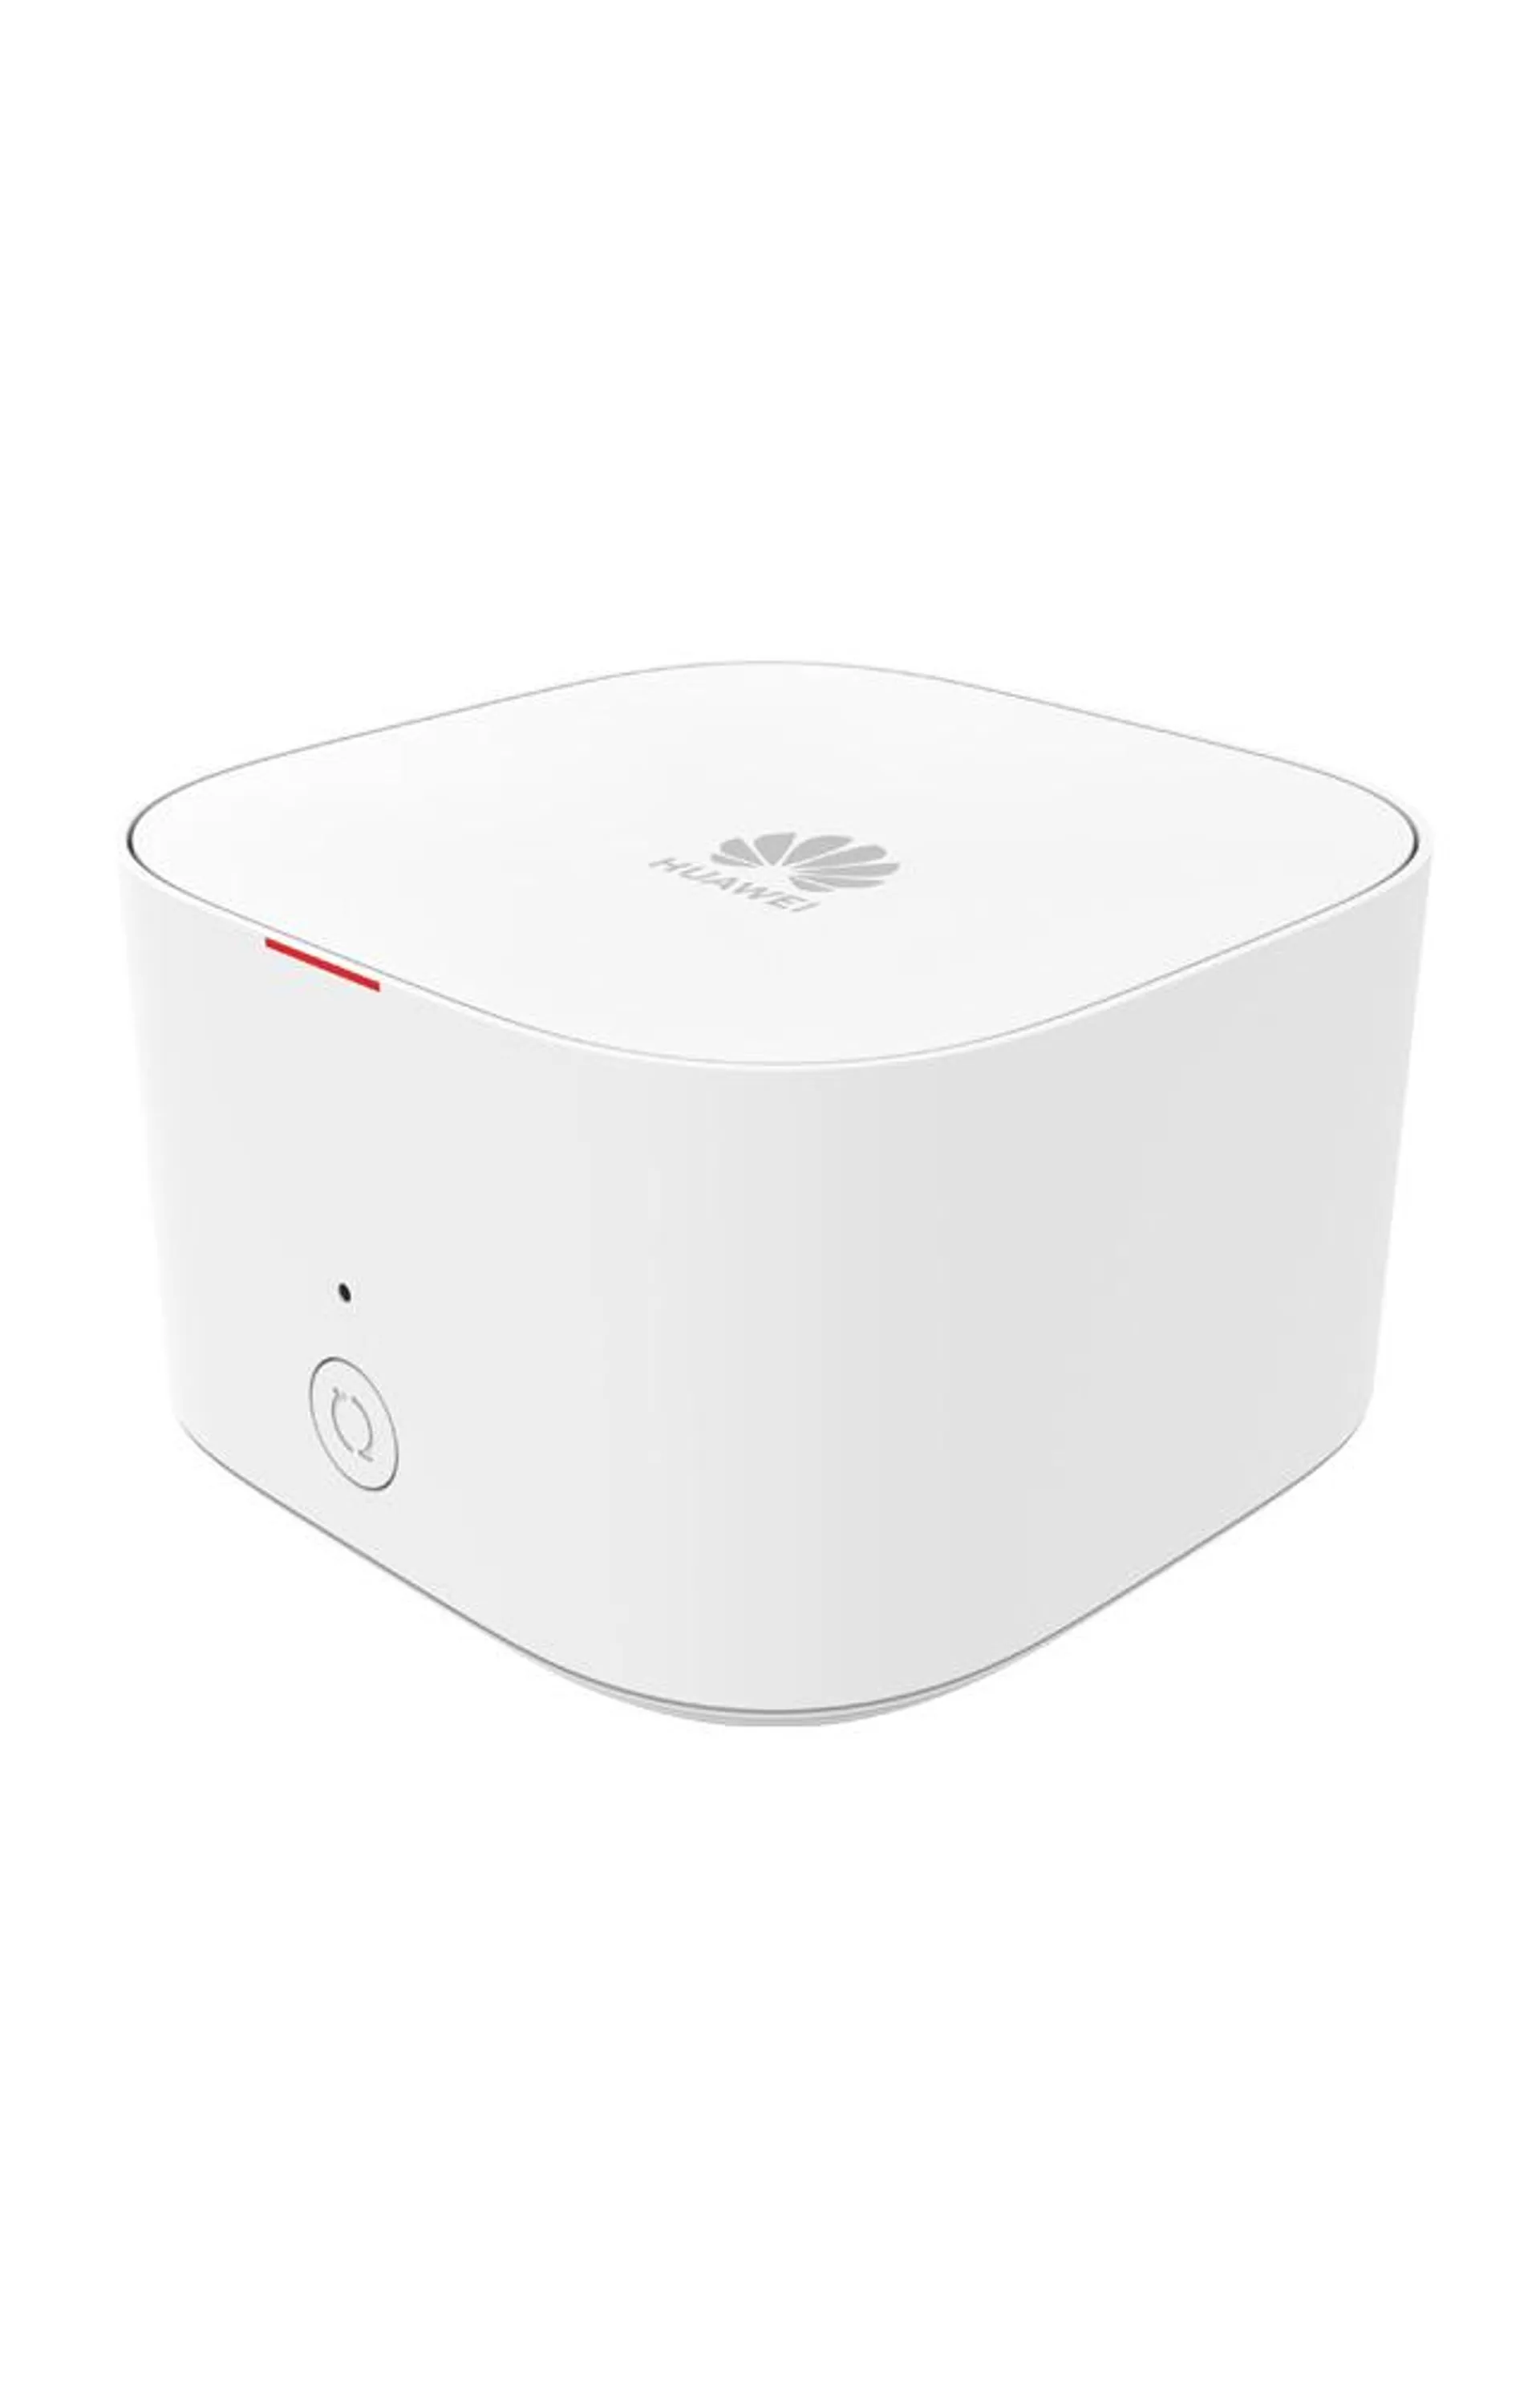 Huawei Access Point Repetidor Wifi